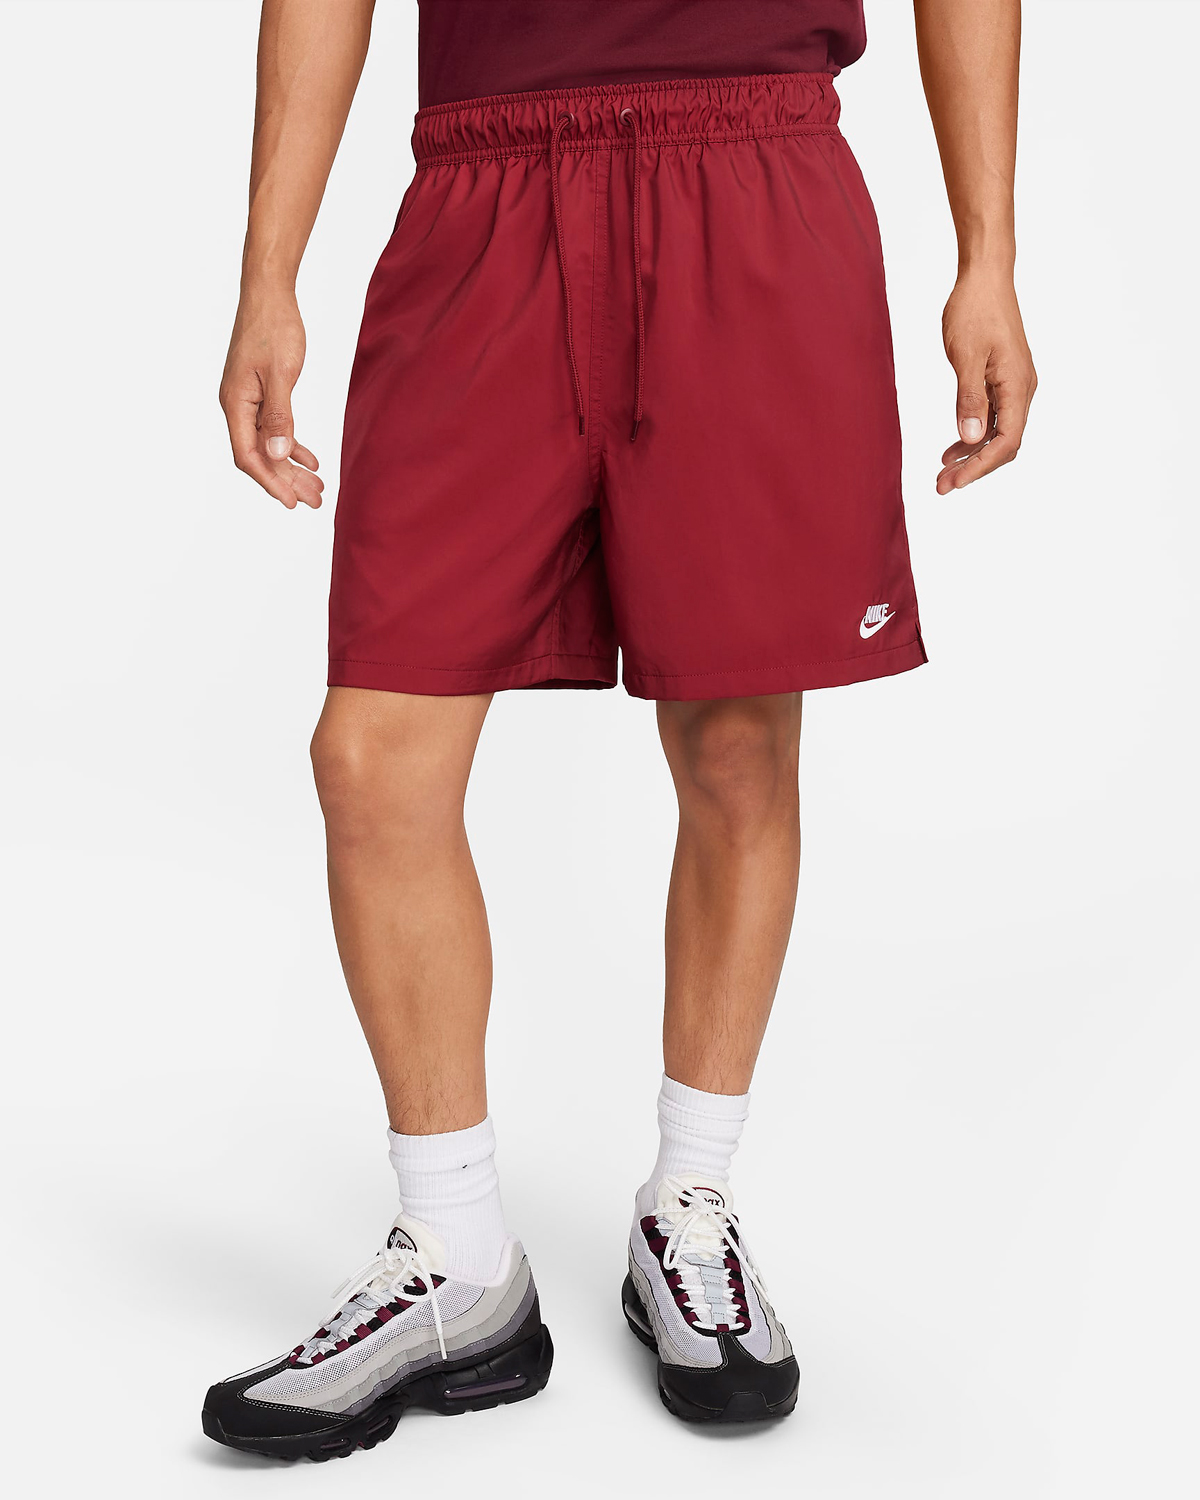 Nike-Club-Woven-Flow-Shorts-Team-Red